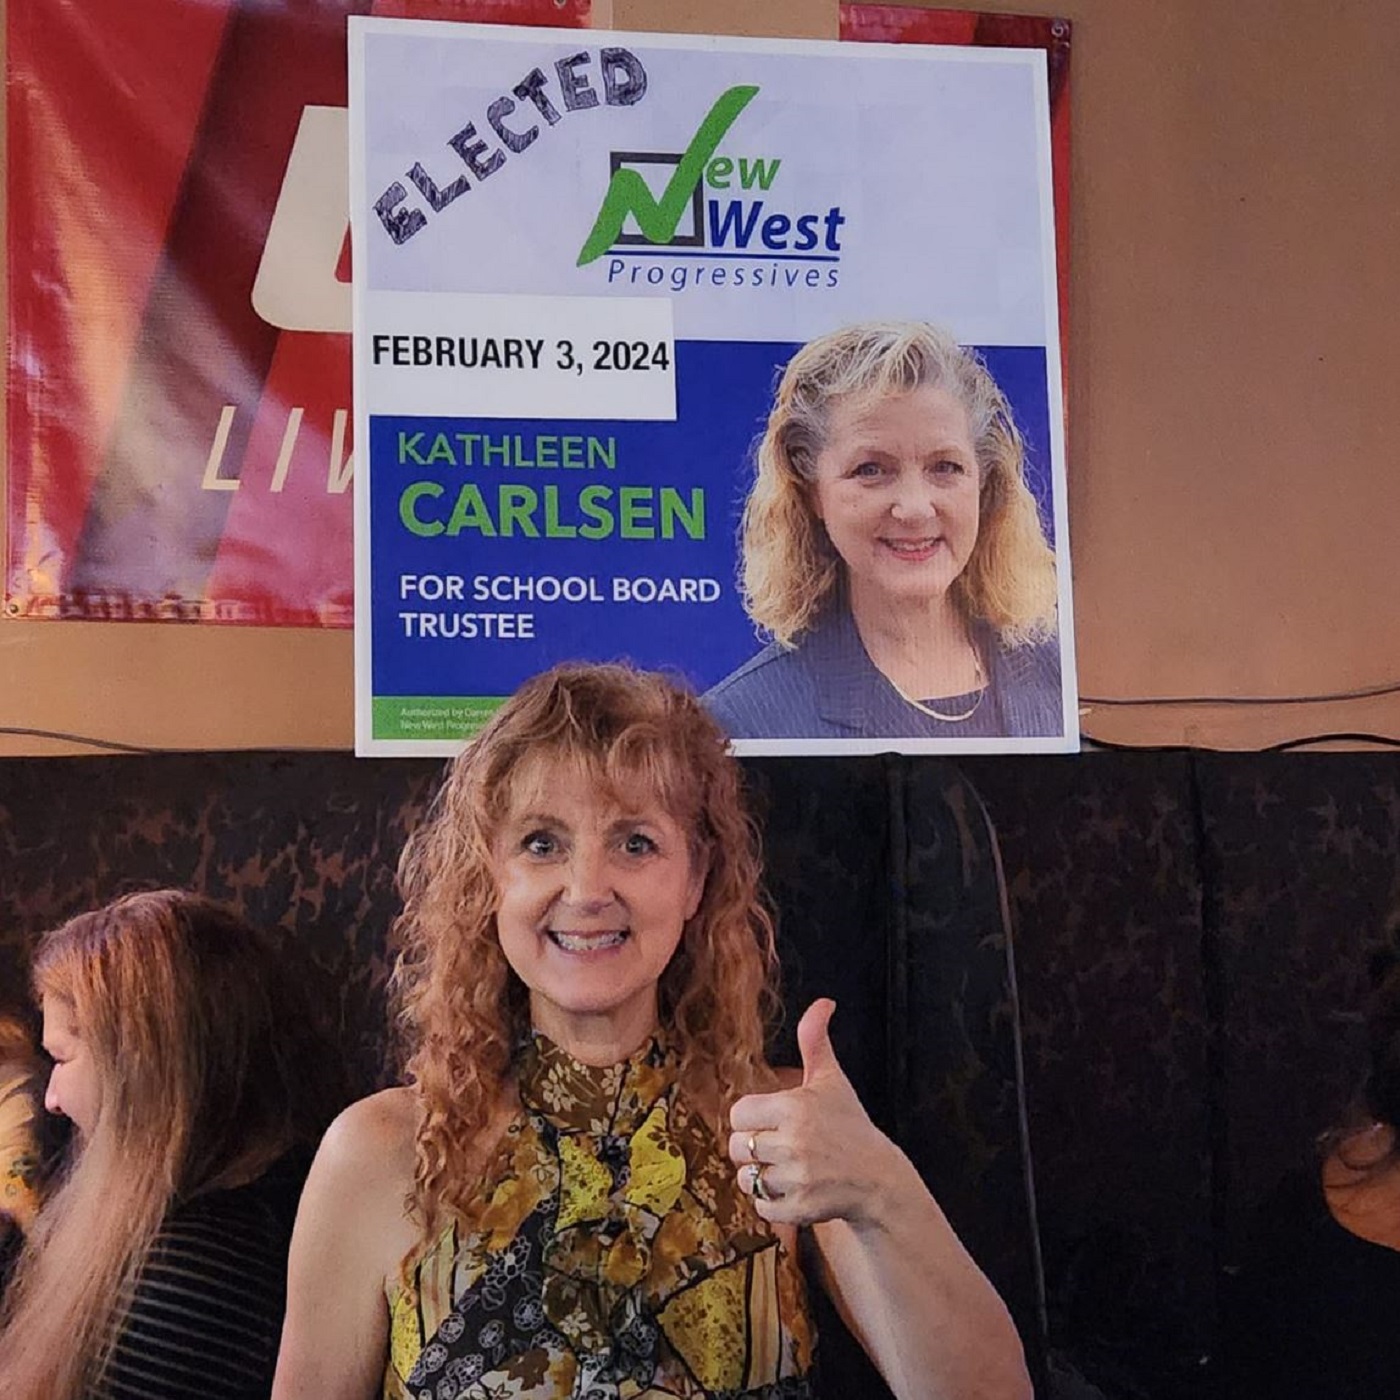 Carlsen secures victory and becomes 4th NWP elected official in New West